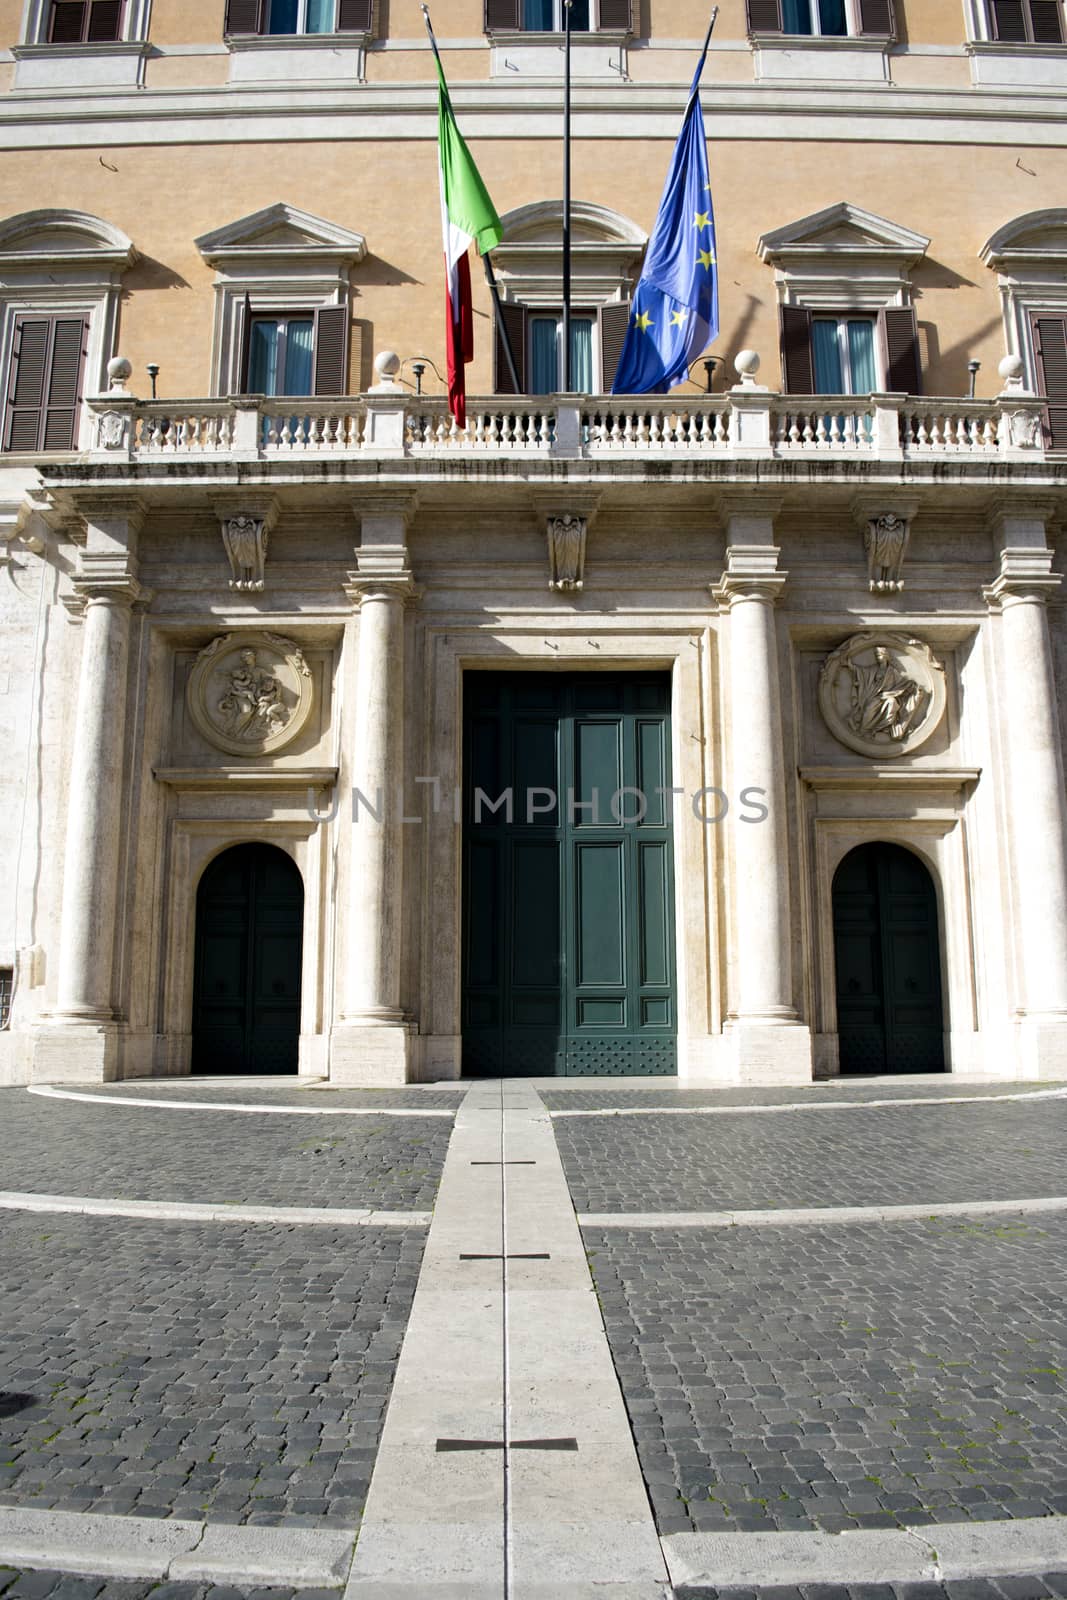 main entrance of montecitorio palace in rome place of Italian Parliament